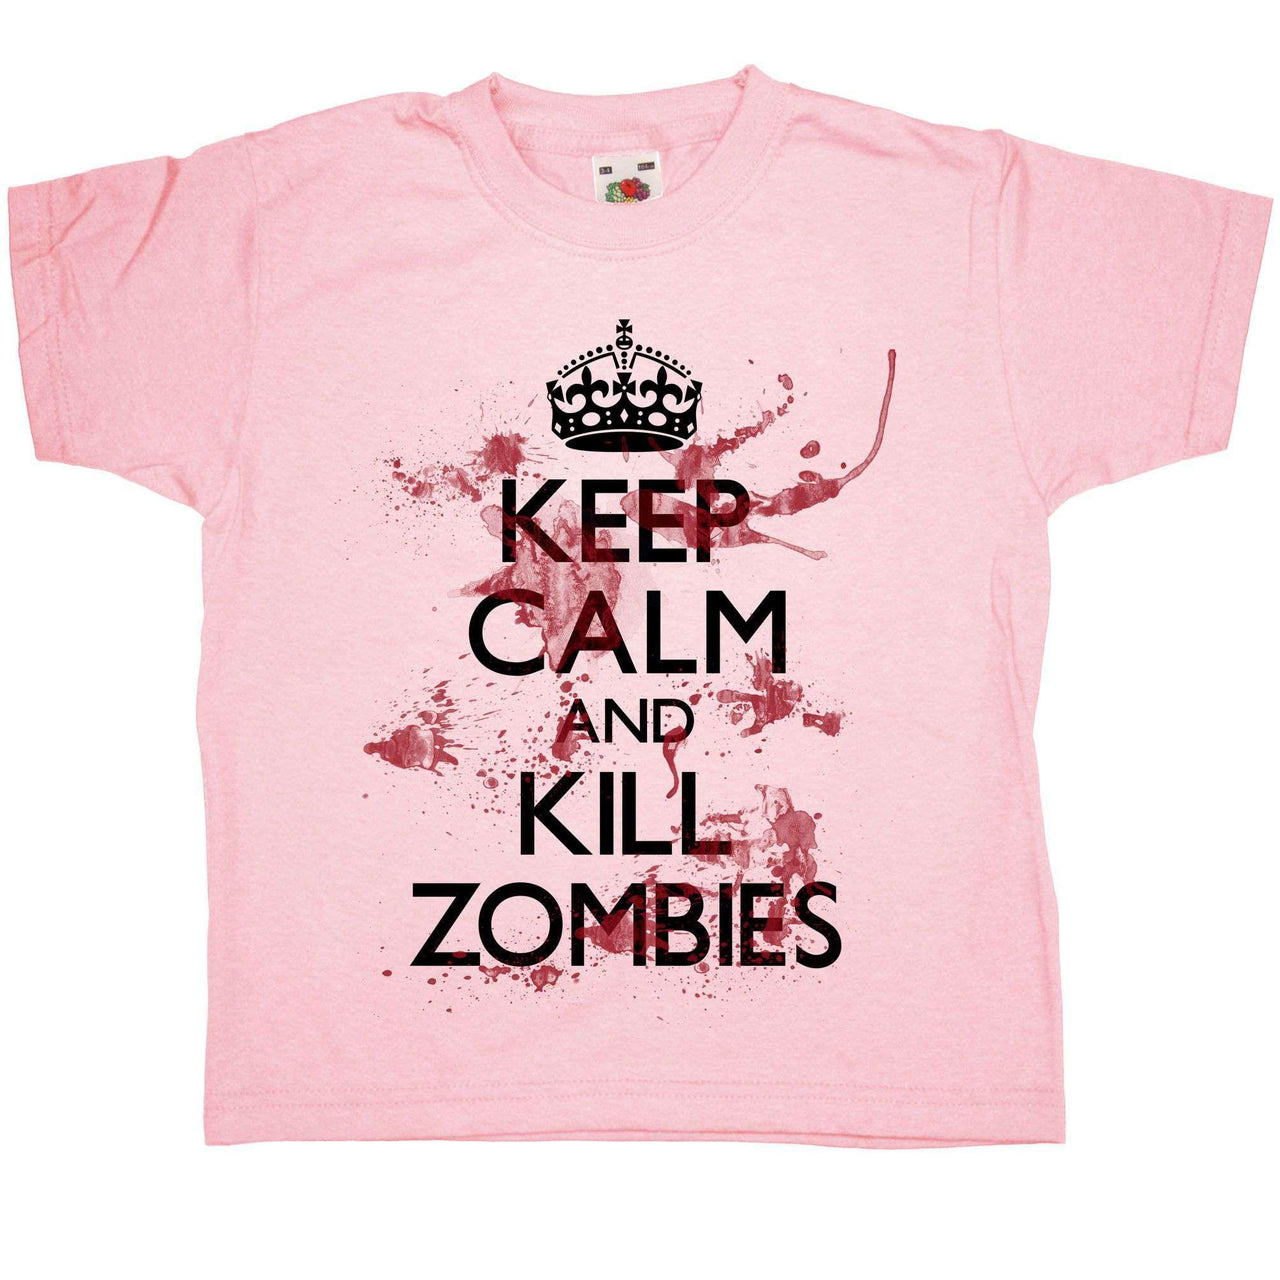 Keep Calm And Kill Zombies Kids Graphic T-Shirt 8Ball